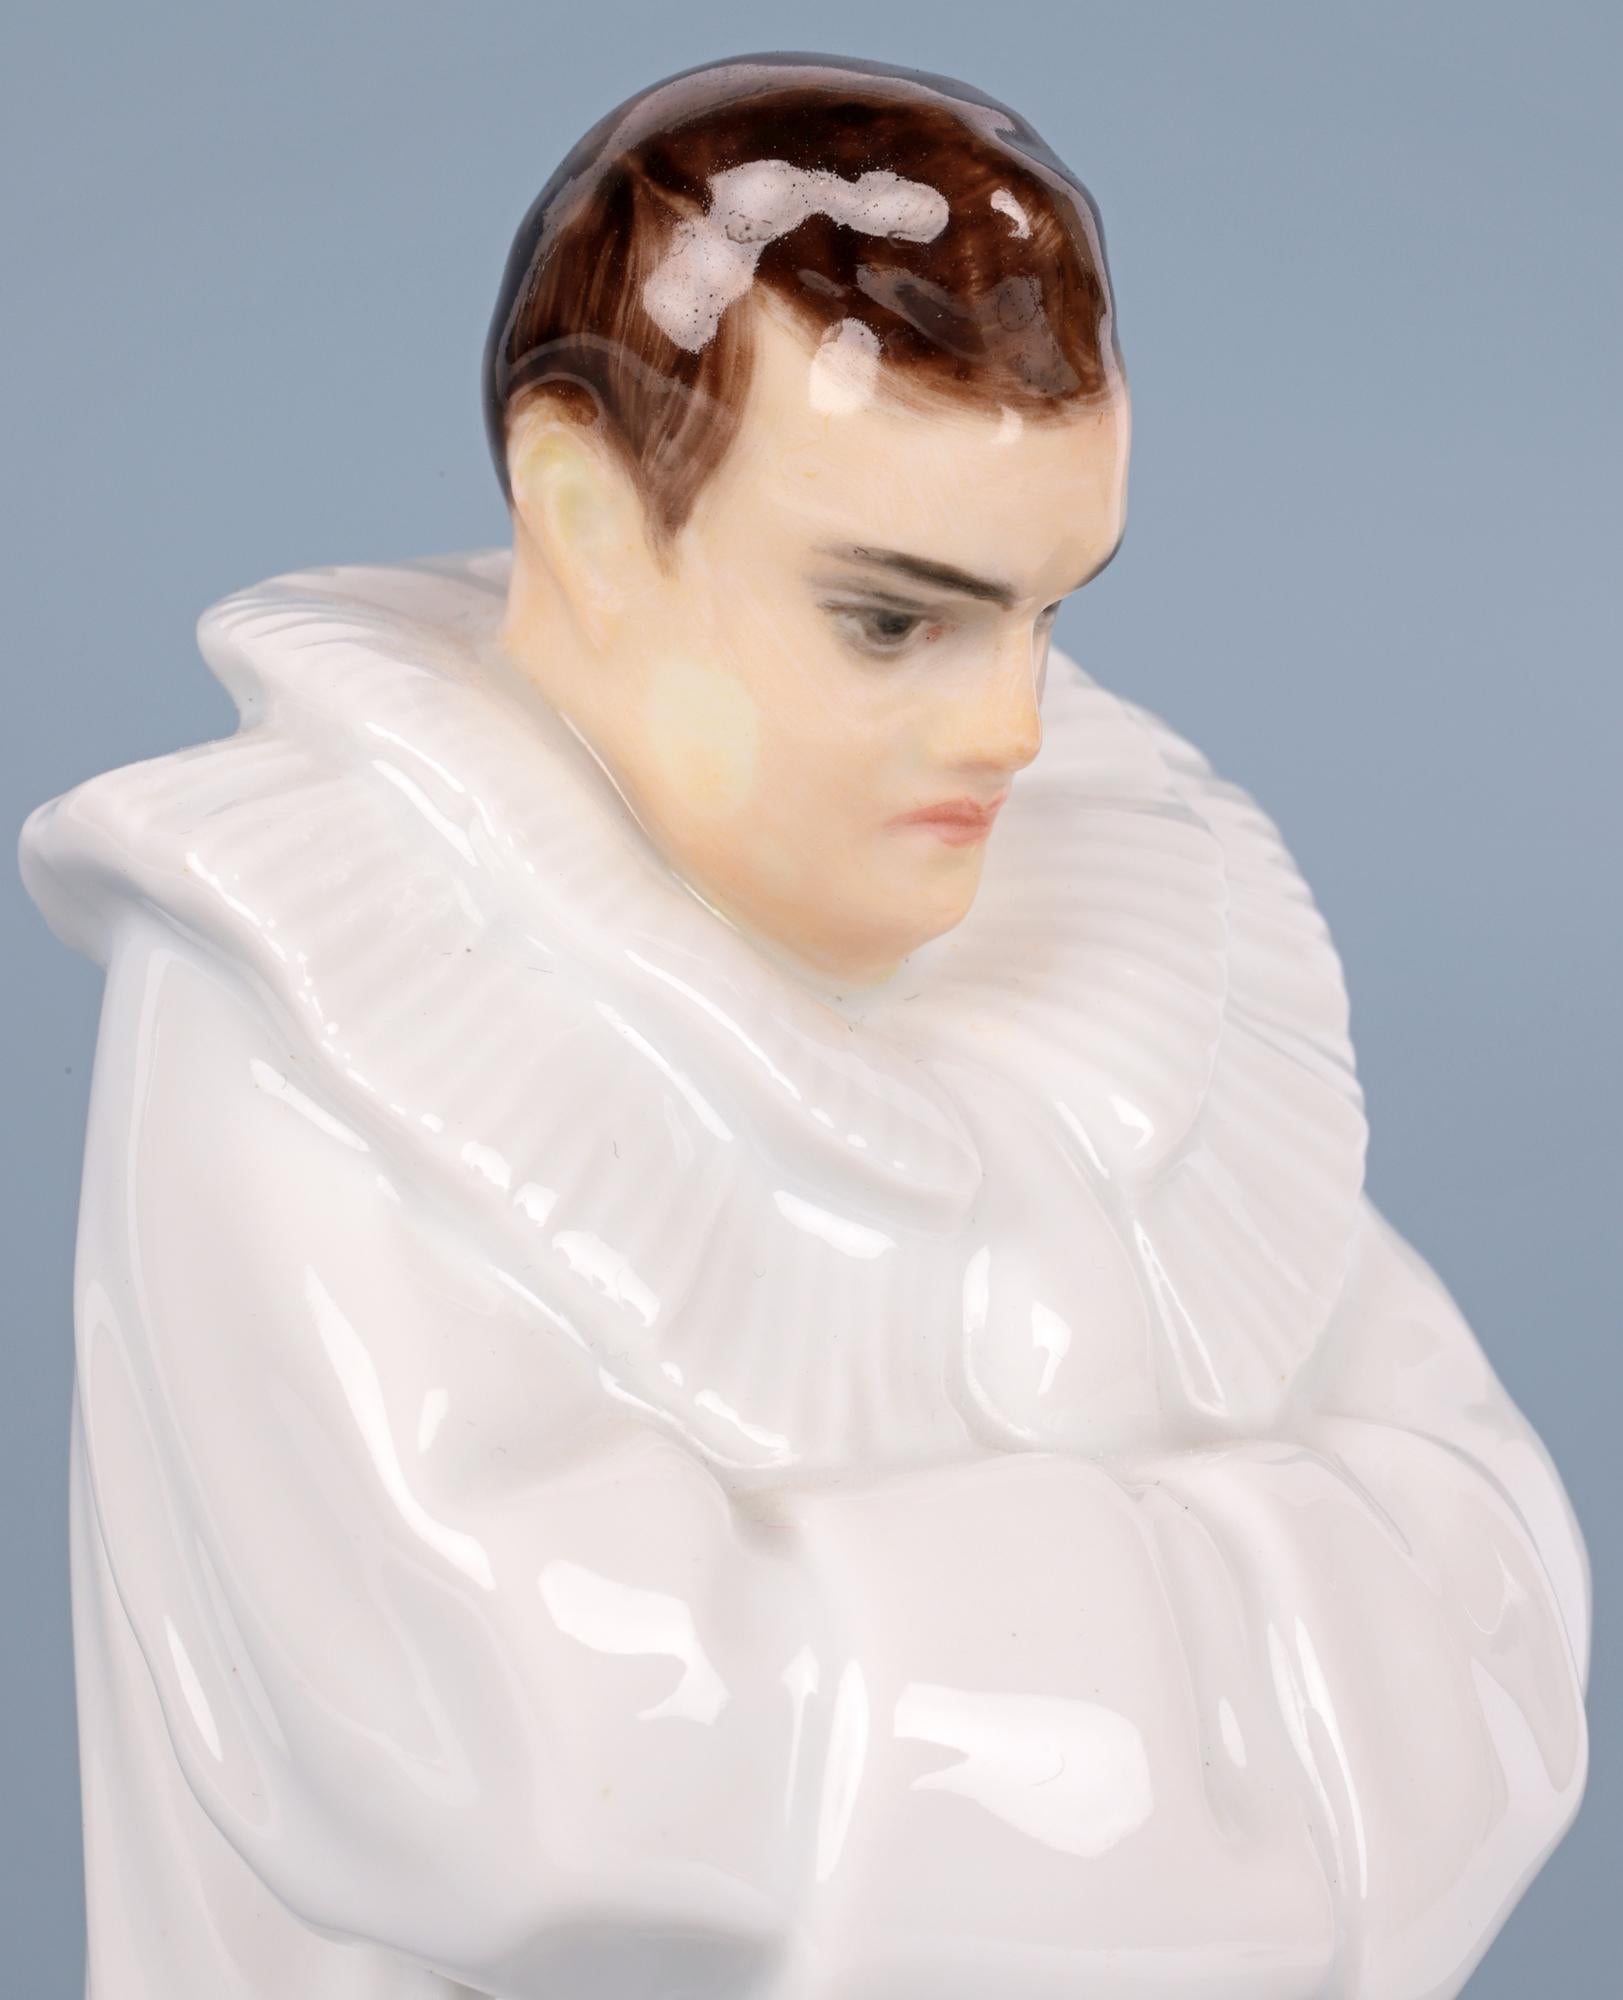 A superb and stylish German Rosenthal Art Deco porcelain figure of Enrico Caruso by renowned designer Thekla Harth-Altmann (1887-1998) and designed in 1913. The figure portrays the world acclaimed Italian Opera singer and Tenor Enrico Caruso